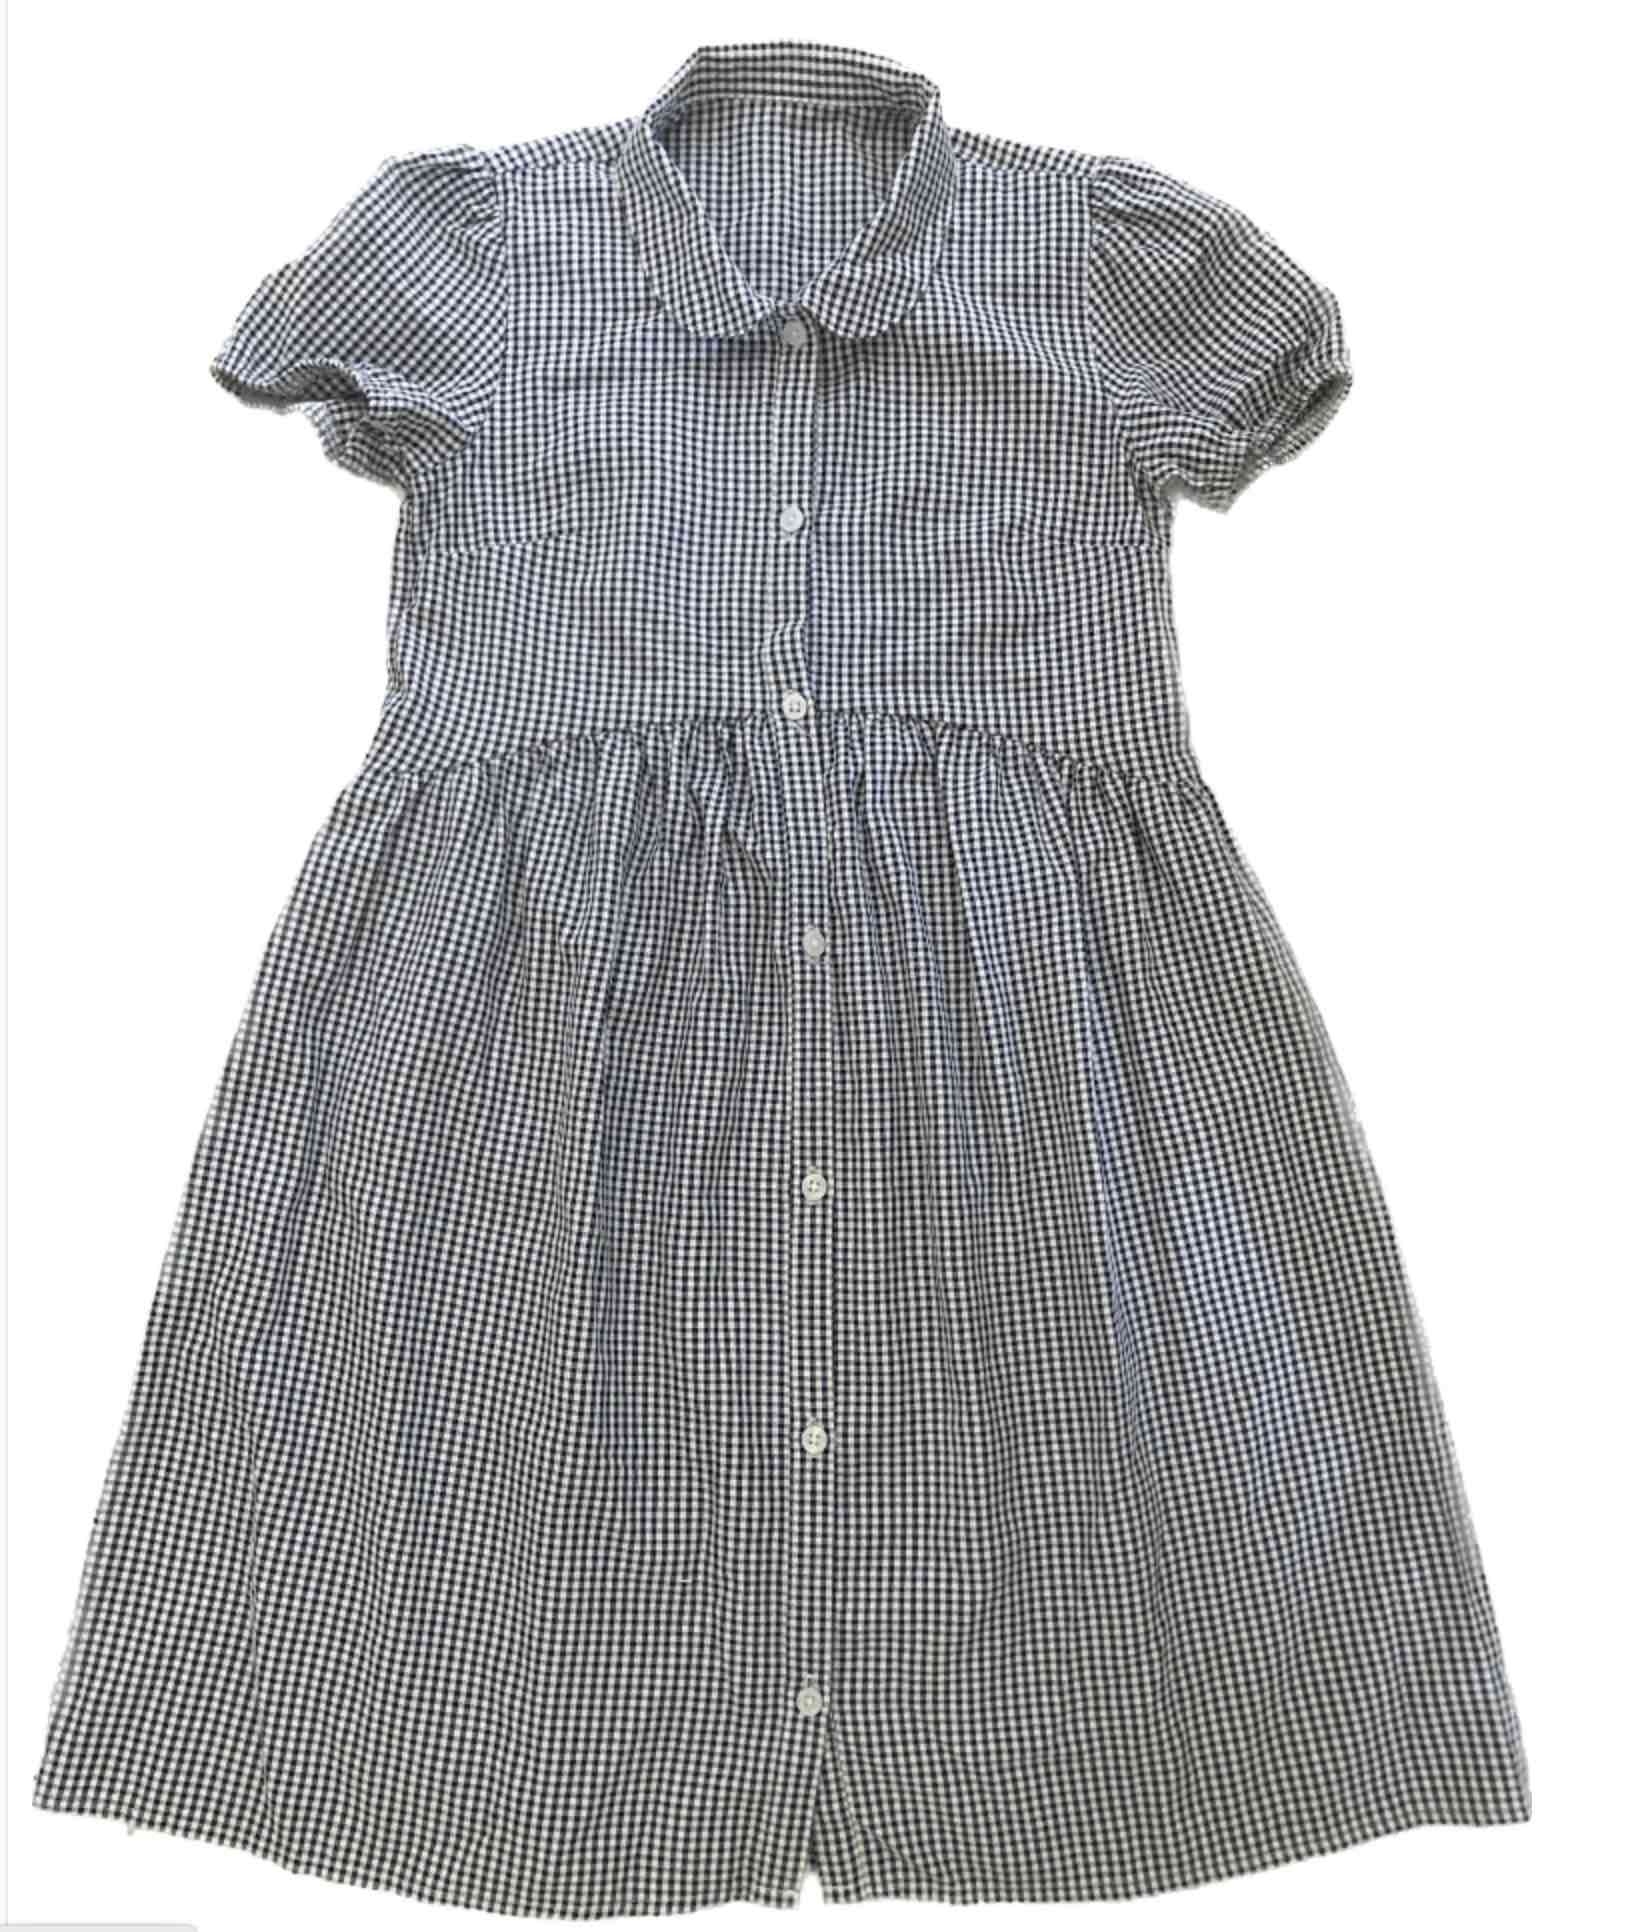 Girls' Navy Blue Gingham Summer Dress, Button Front, Gathered Skirt, 10-11 Y